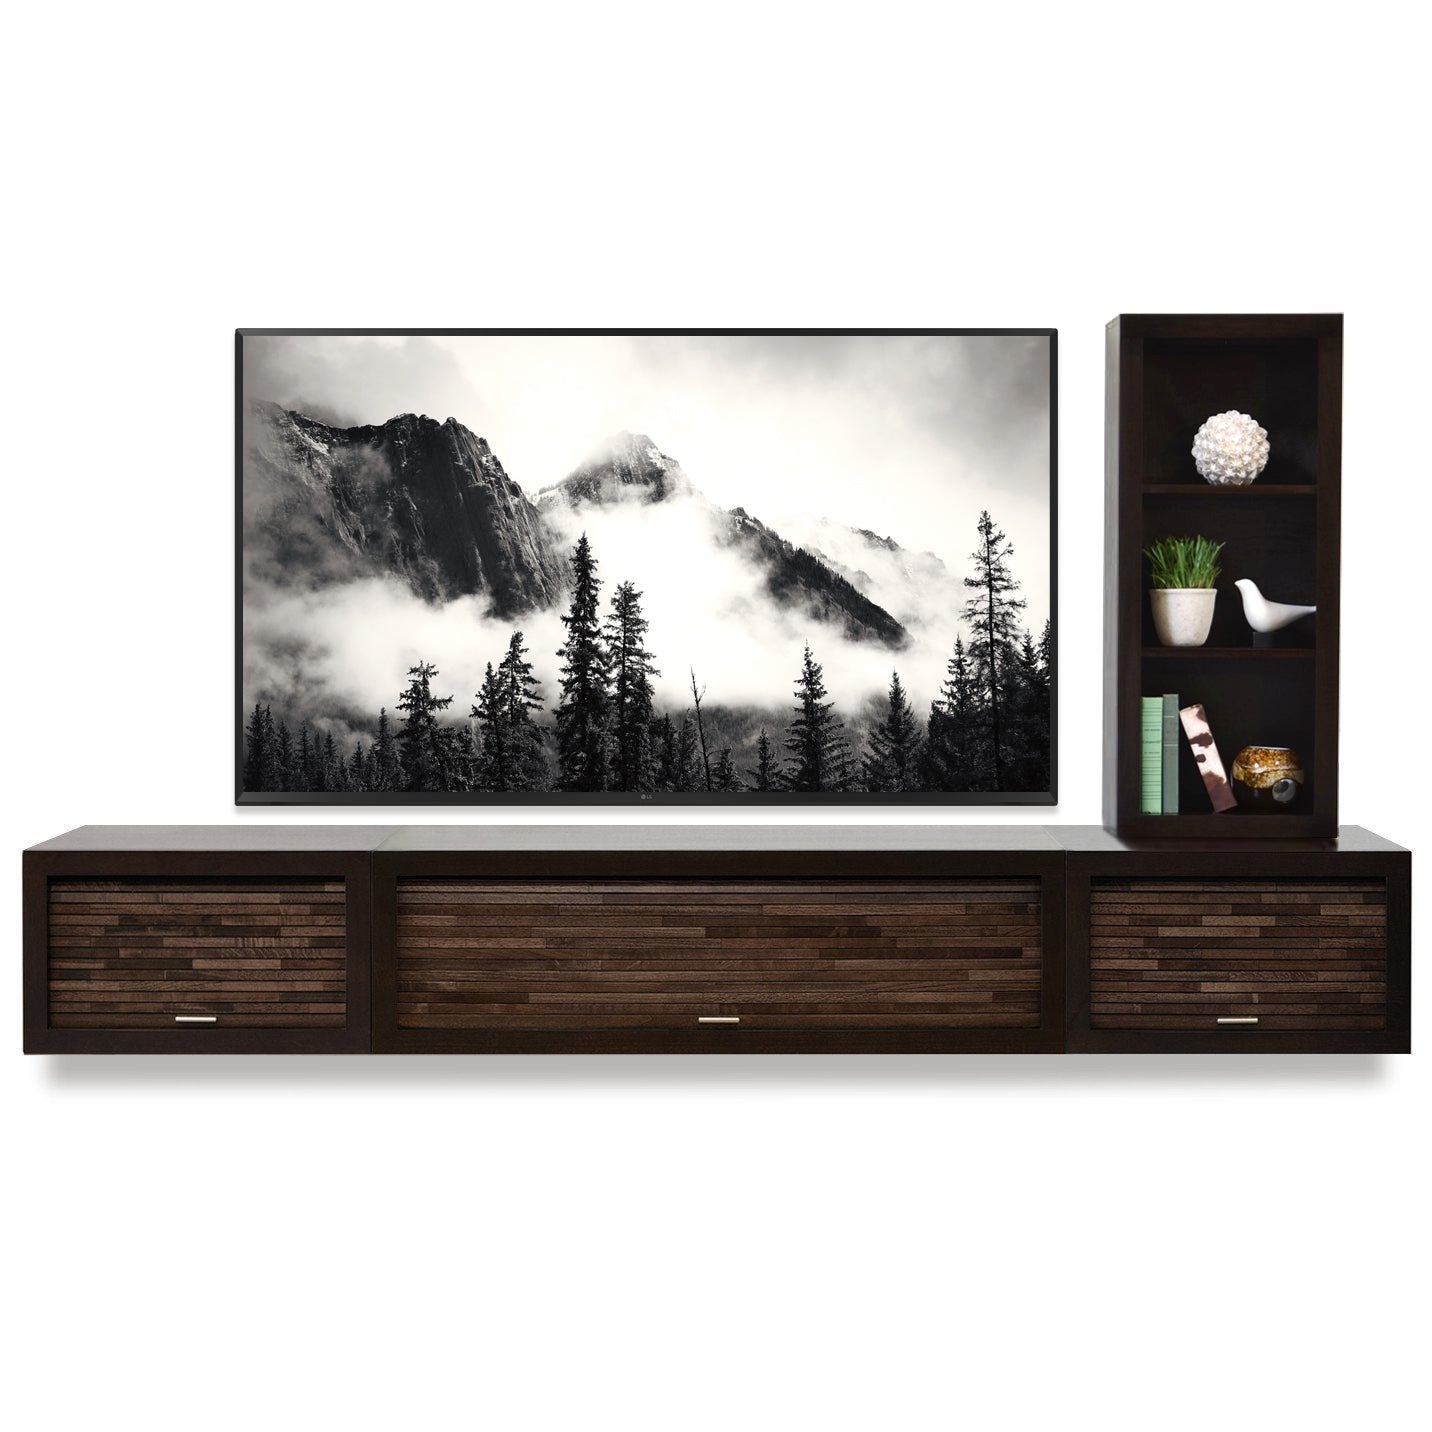 Woodwaves - Floating TV Stand - Wall Mounted Entertainment Center - ECO GEO Espresso